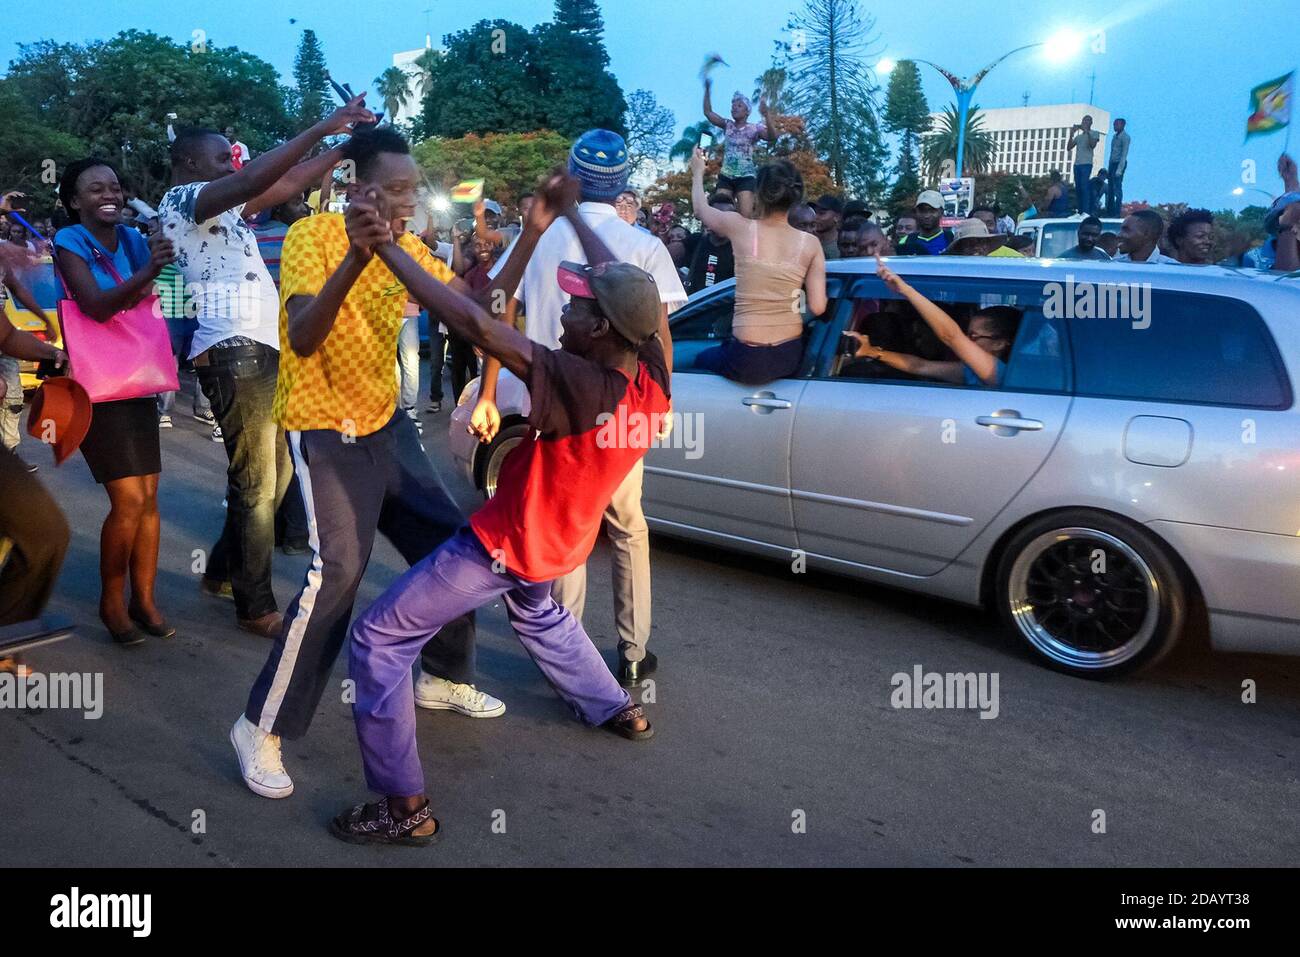 Revelers took to the streets in Bulawayo, Zimbabwe, moments after news broke that, after 37 years, Robert Mugabe resigned as president. Stock Photo